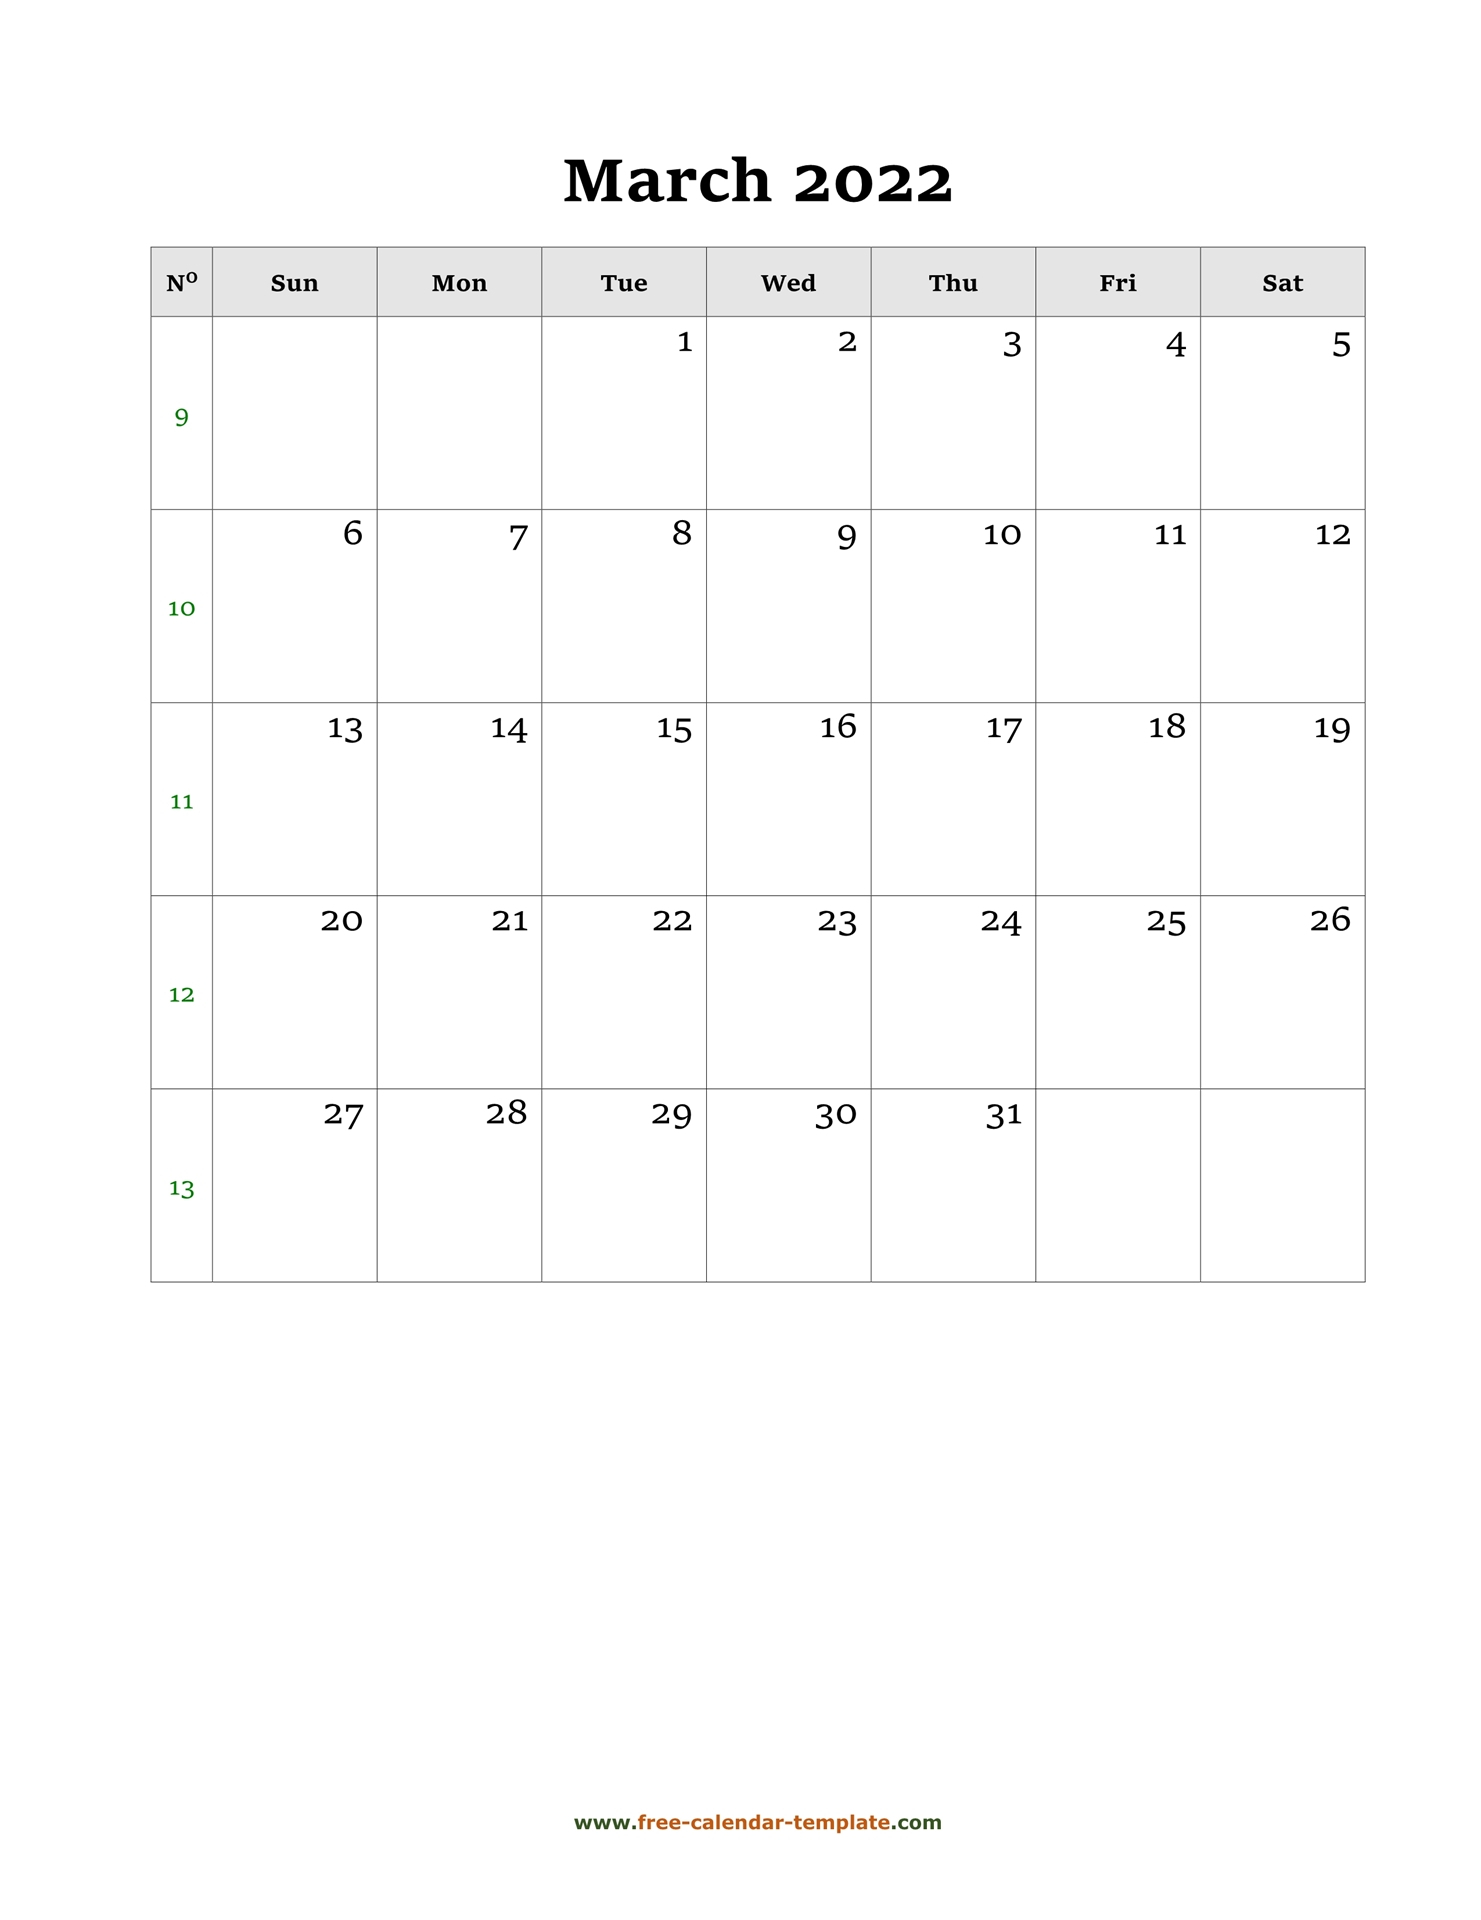 March Calendar 2022 Simple Design With Large Box On Each